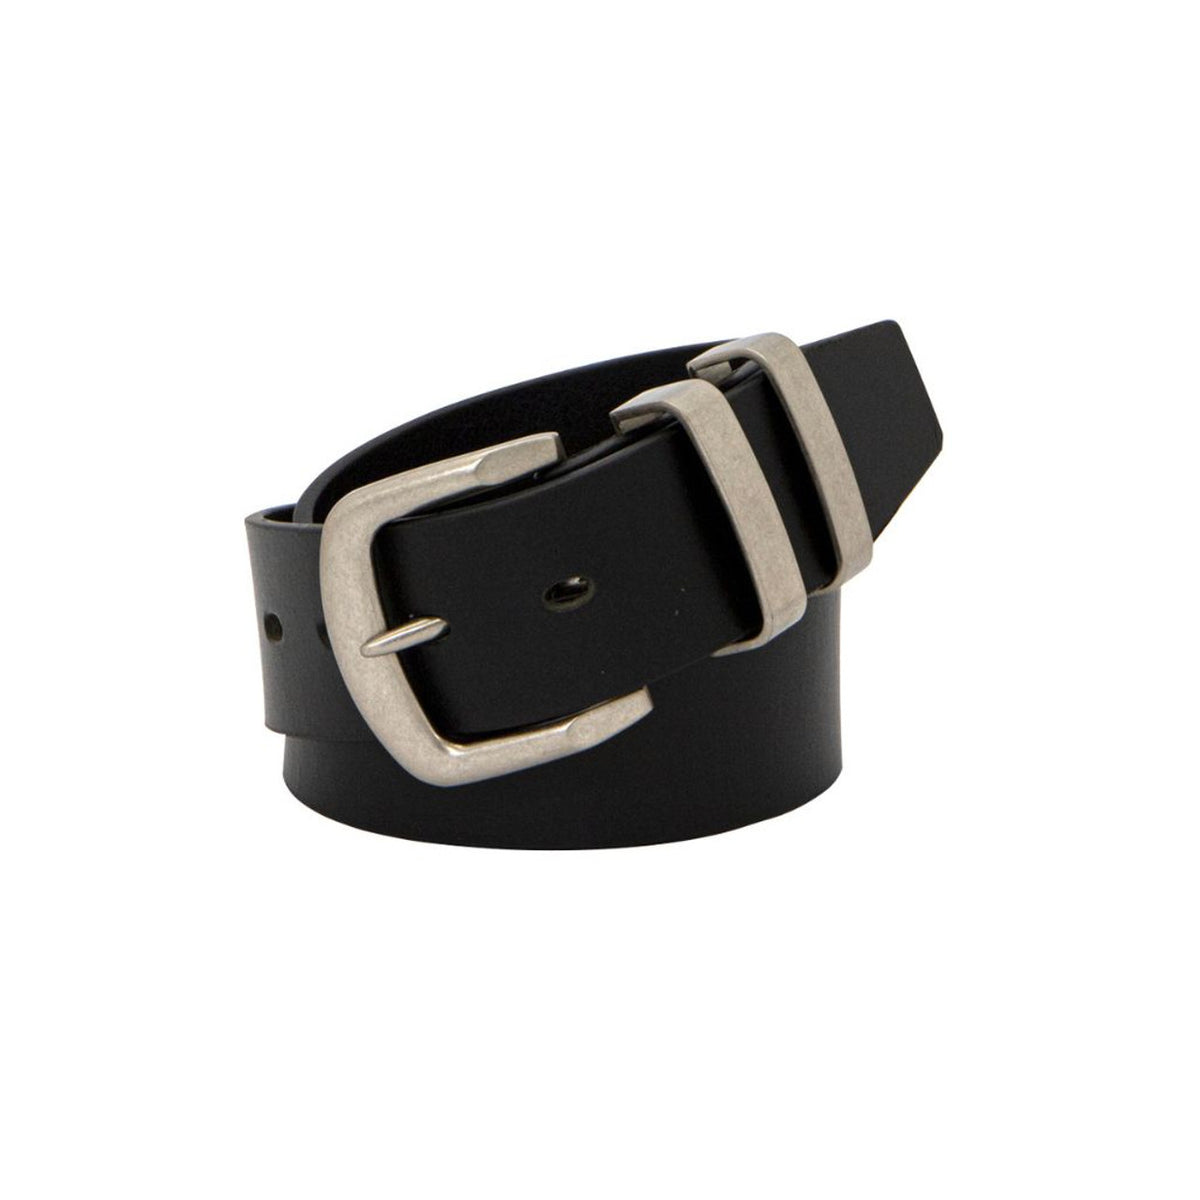 Buckle Brumby 38mm Leather Belt